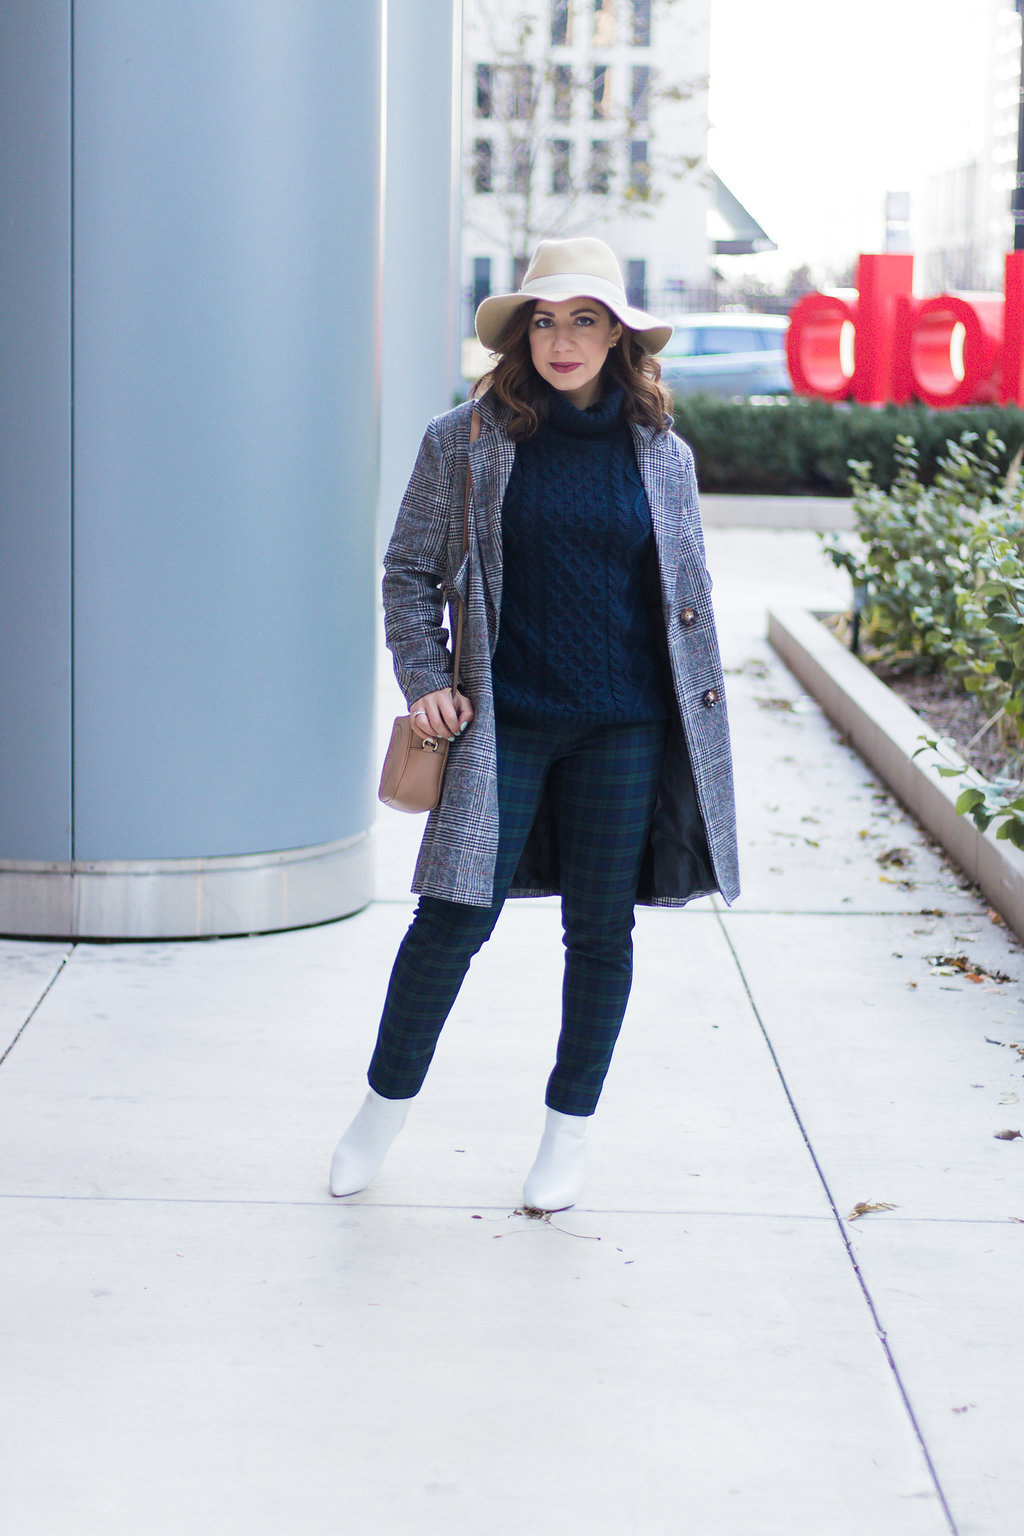 Lifestyle blogger Roxanne of Glass of Glam wearing plaid pants, a plaid coat, felt fedora, and a cable knit sweater